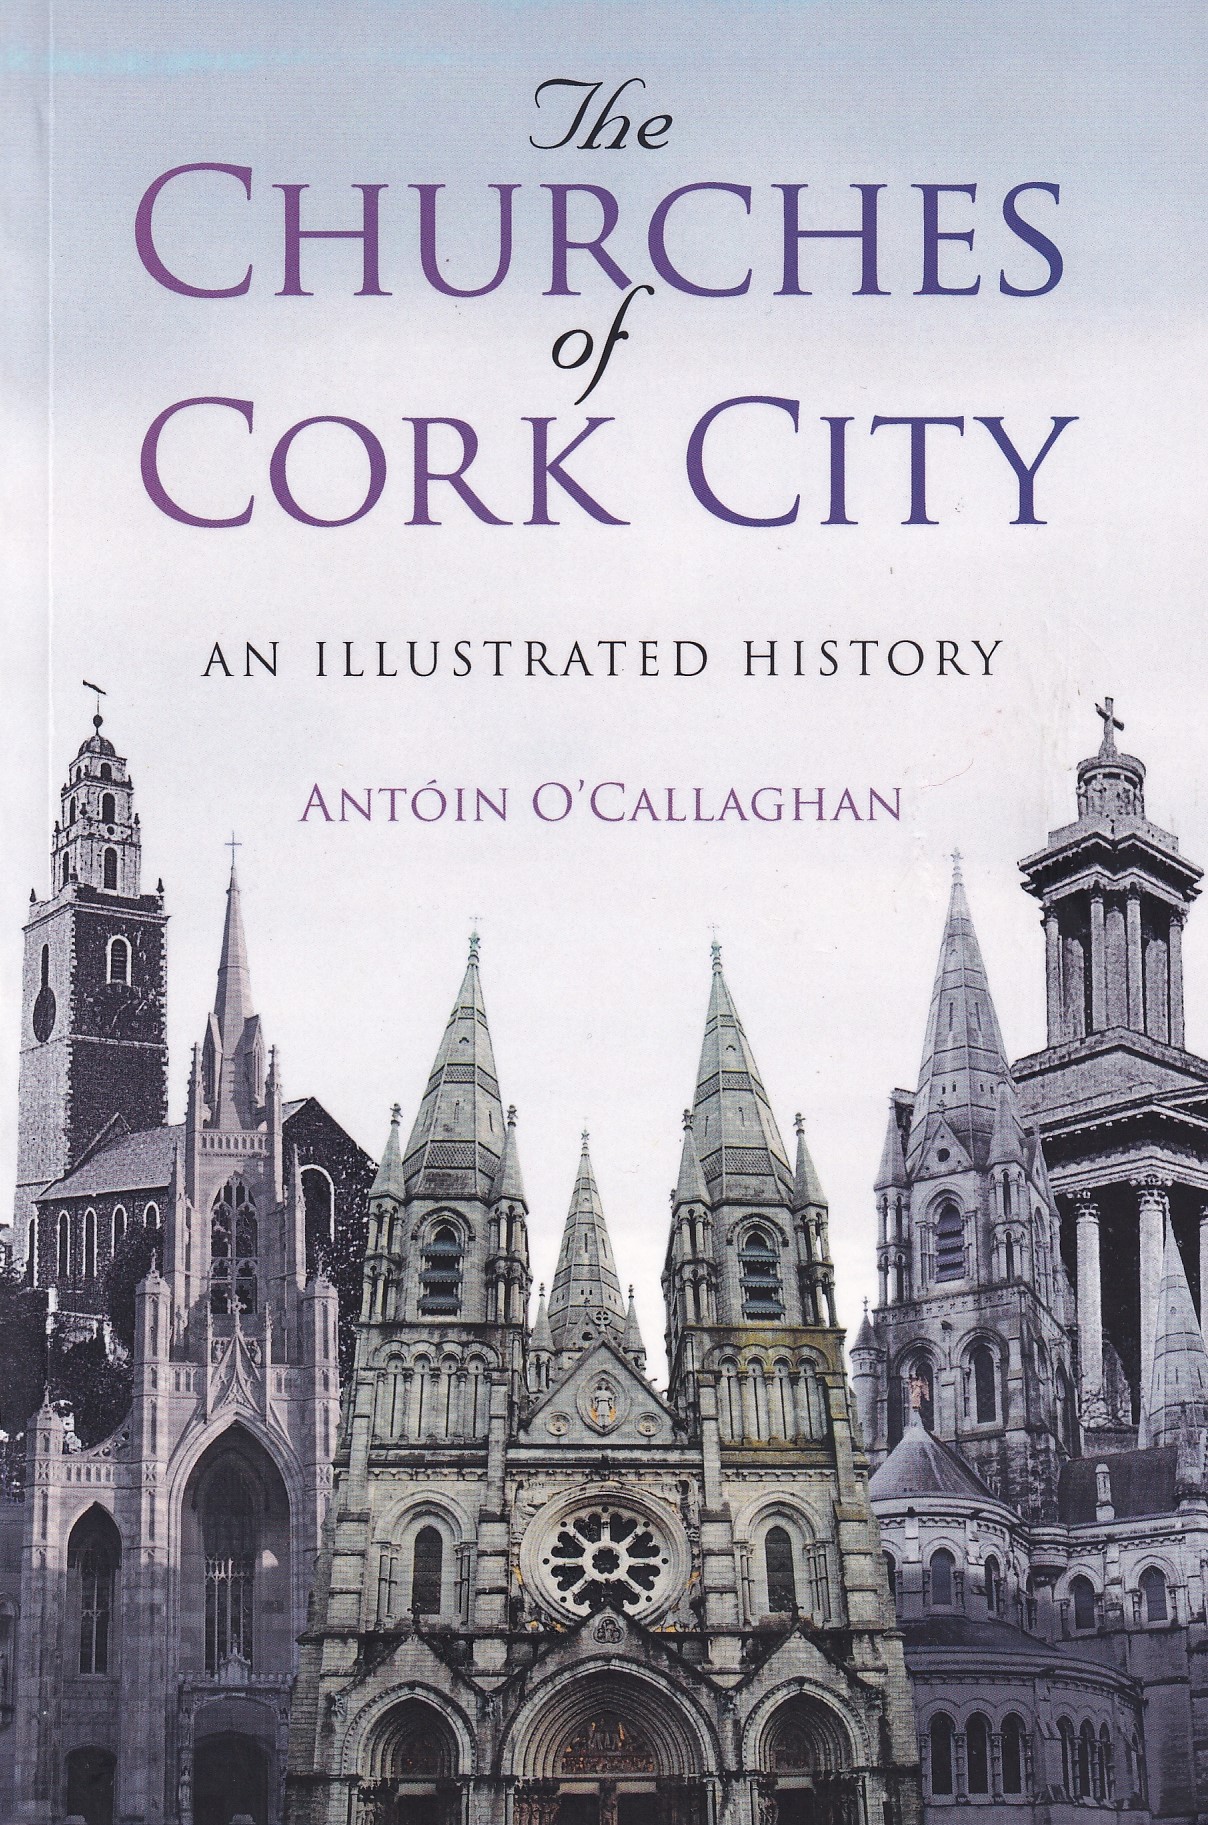 The Churches of Cork City: An Illustrated History by Antoin O'Callaghan